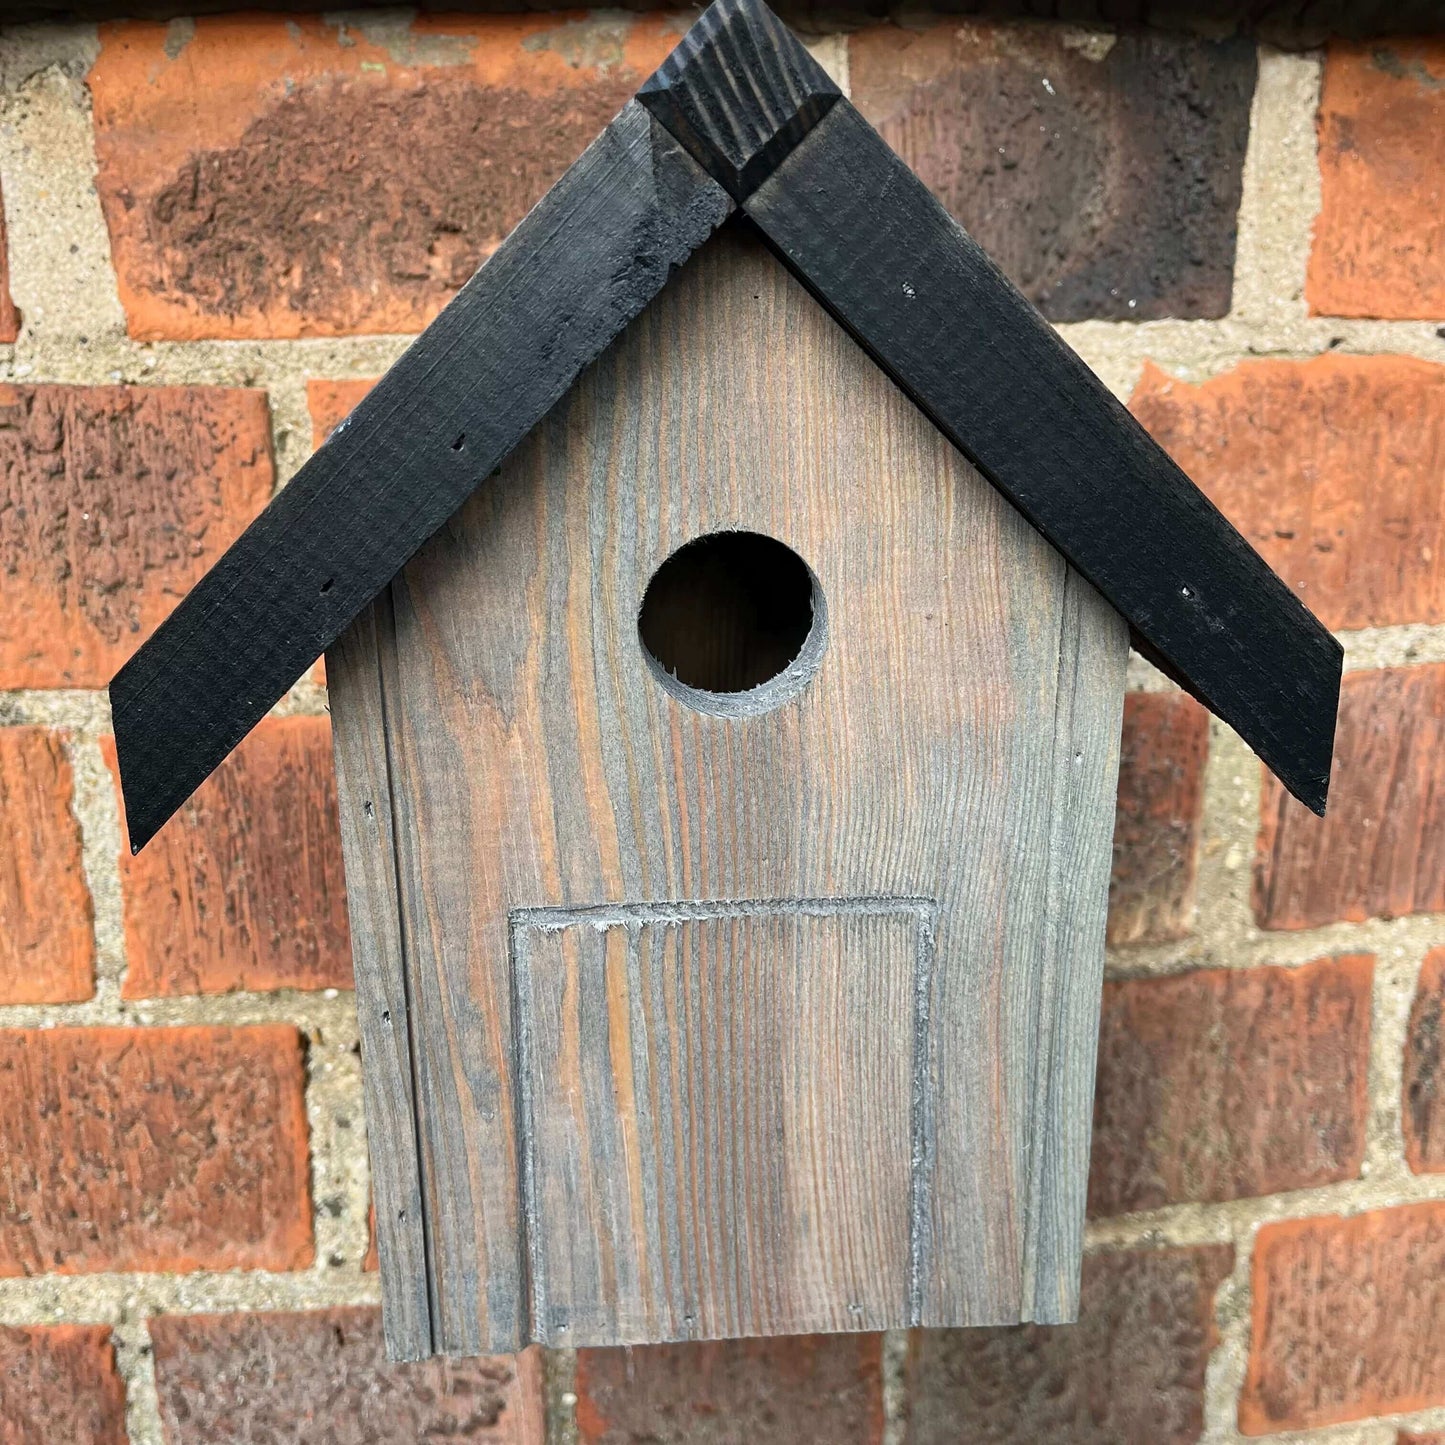 Wooden nest box with black, painted roof.